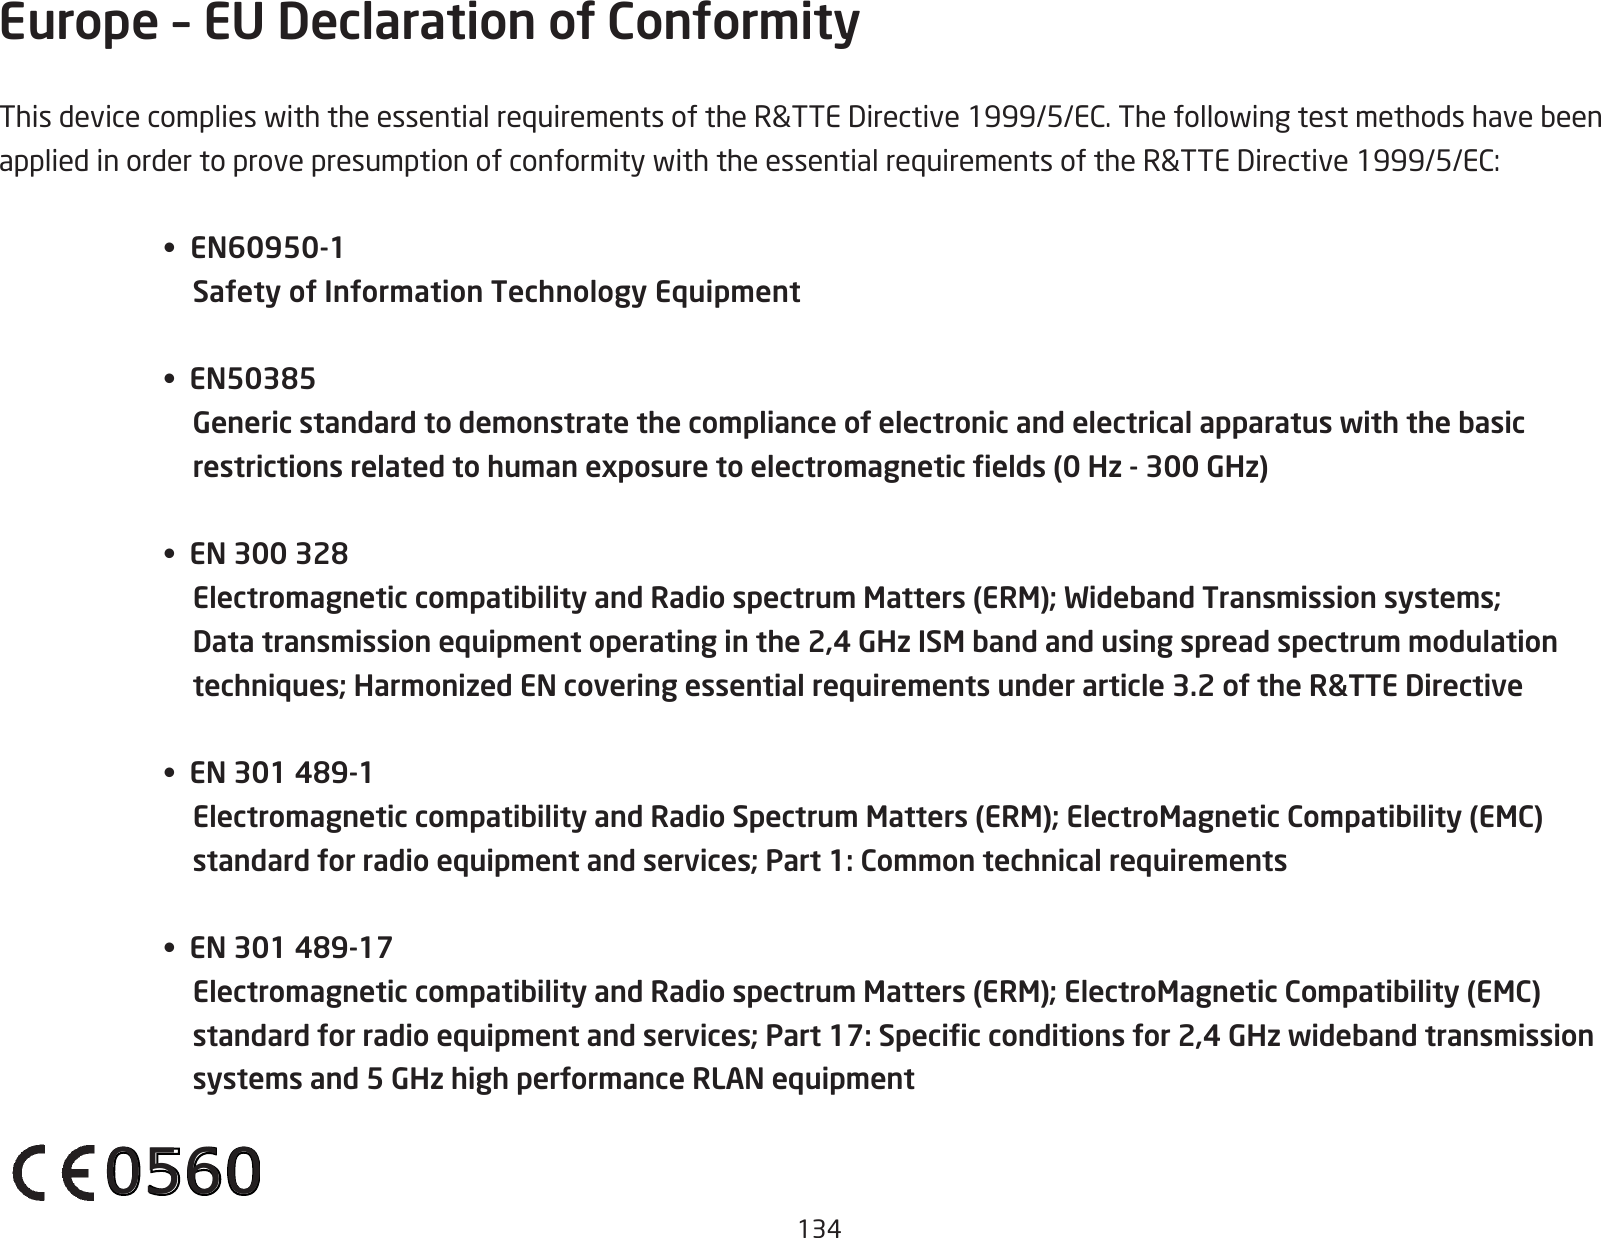 134Europe – EU Declaration of ConformityThisdevicecomplieswiththeessentialrequirementsoftheR&amp;TTEDirective1999/5/EC.ThefollowingtestmethodshavebeenappliedinordertoprovepresumptionofconformitywiththeessentialrequirementsoftheR&amp;TTEDirective1999/5/EC:•  EN60950-1 Safety of Information Technology Equipment•  EN50385  Generic standard to demonstrate the compliance of electronic and electrical apparatus with the basic restrictions related to human exposure to electromagnetic elds (0 Hz - 300 GHz)•  EN 300 328  Electromagnetic compatibility and Radio spectrum Matters (ERM); Wideband Transmission systems; Data transmission equipment operating in the 2,4 GHz ISM band and using spread spectrum modulation techniques; Harmonized EN covering essential requirements under article 3.2 of the R&amp;TTE Directive•  EN 301 489-1  Electromagnetic compatibility and Radio Spectrum Matters (ERM); ElectroMagnetic Compatibility (EMC) standard for radio equipment and services; Part 1: Common technical requirements•  EN 301 489-17  Electromagnetic compatibility and Radio spectrum Matters (ERM); ElectroMagnetic Compatibility (EMC) standard for radio equipment and services; Part 17: Specic conditions for 2,4 GHz wideband transmission systems and 5 GHz high performance RLAN equipment0560